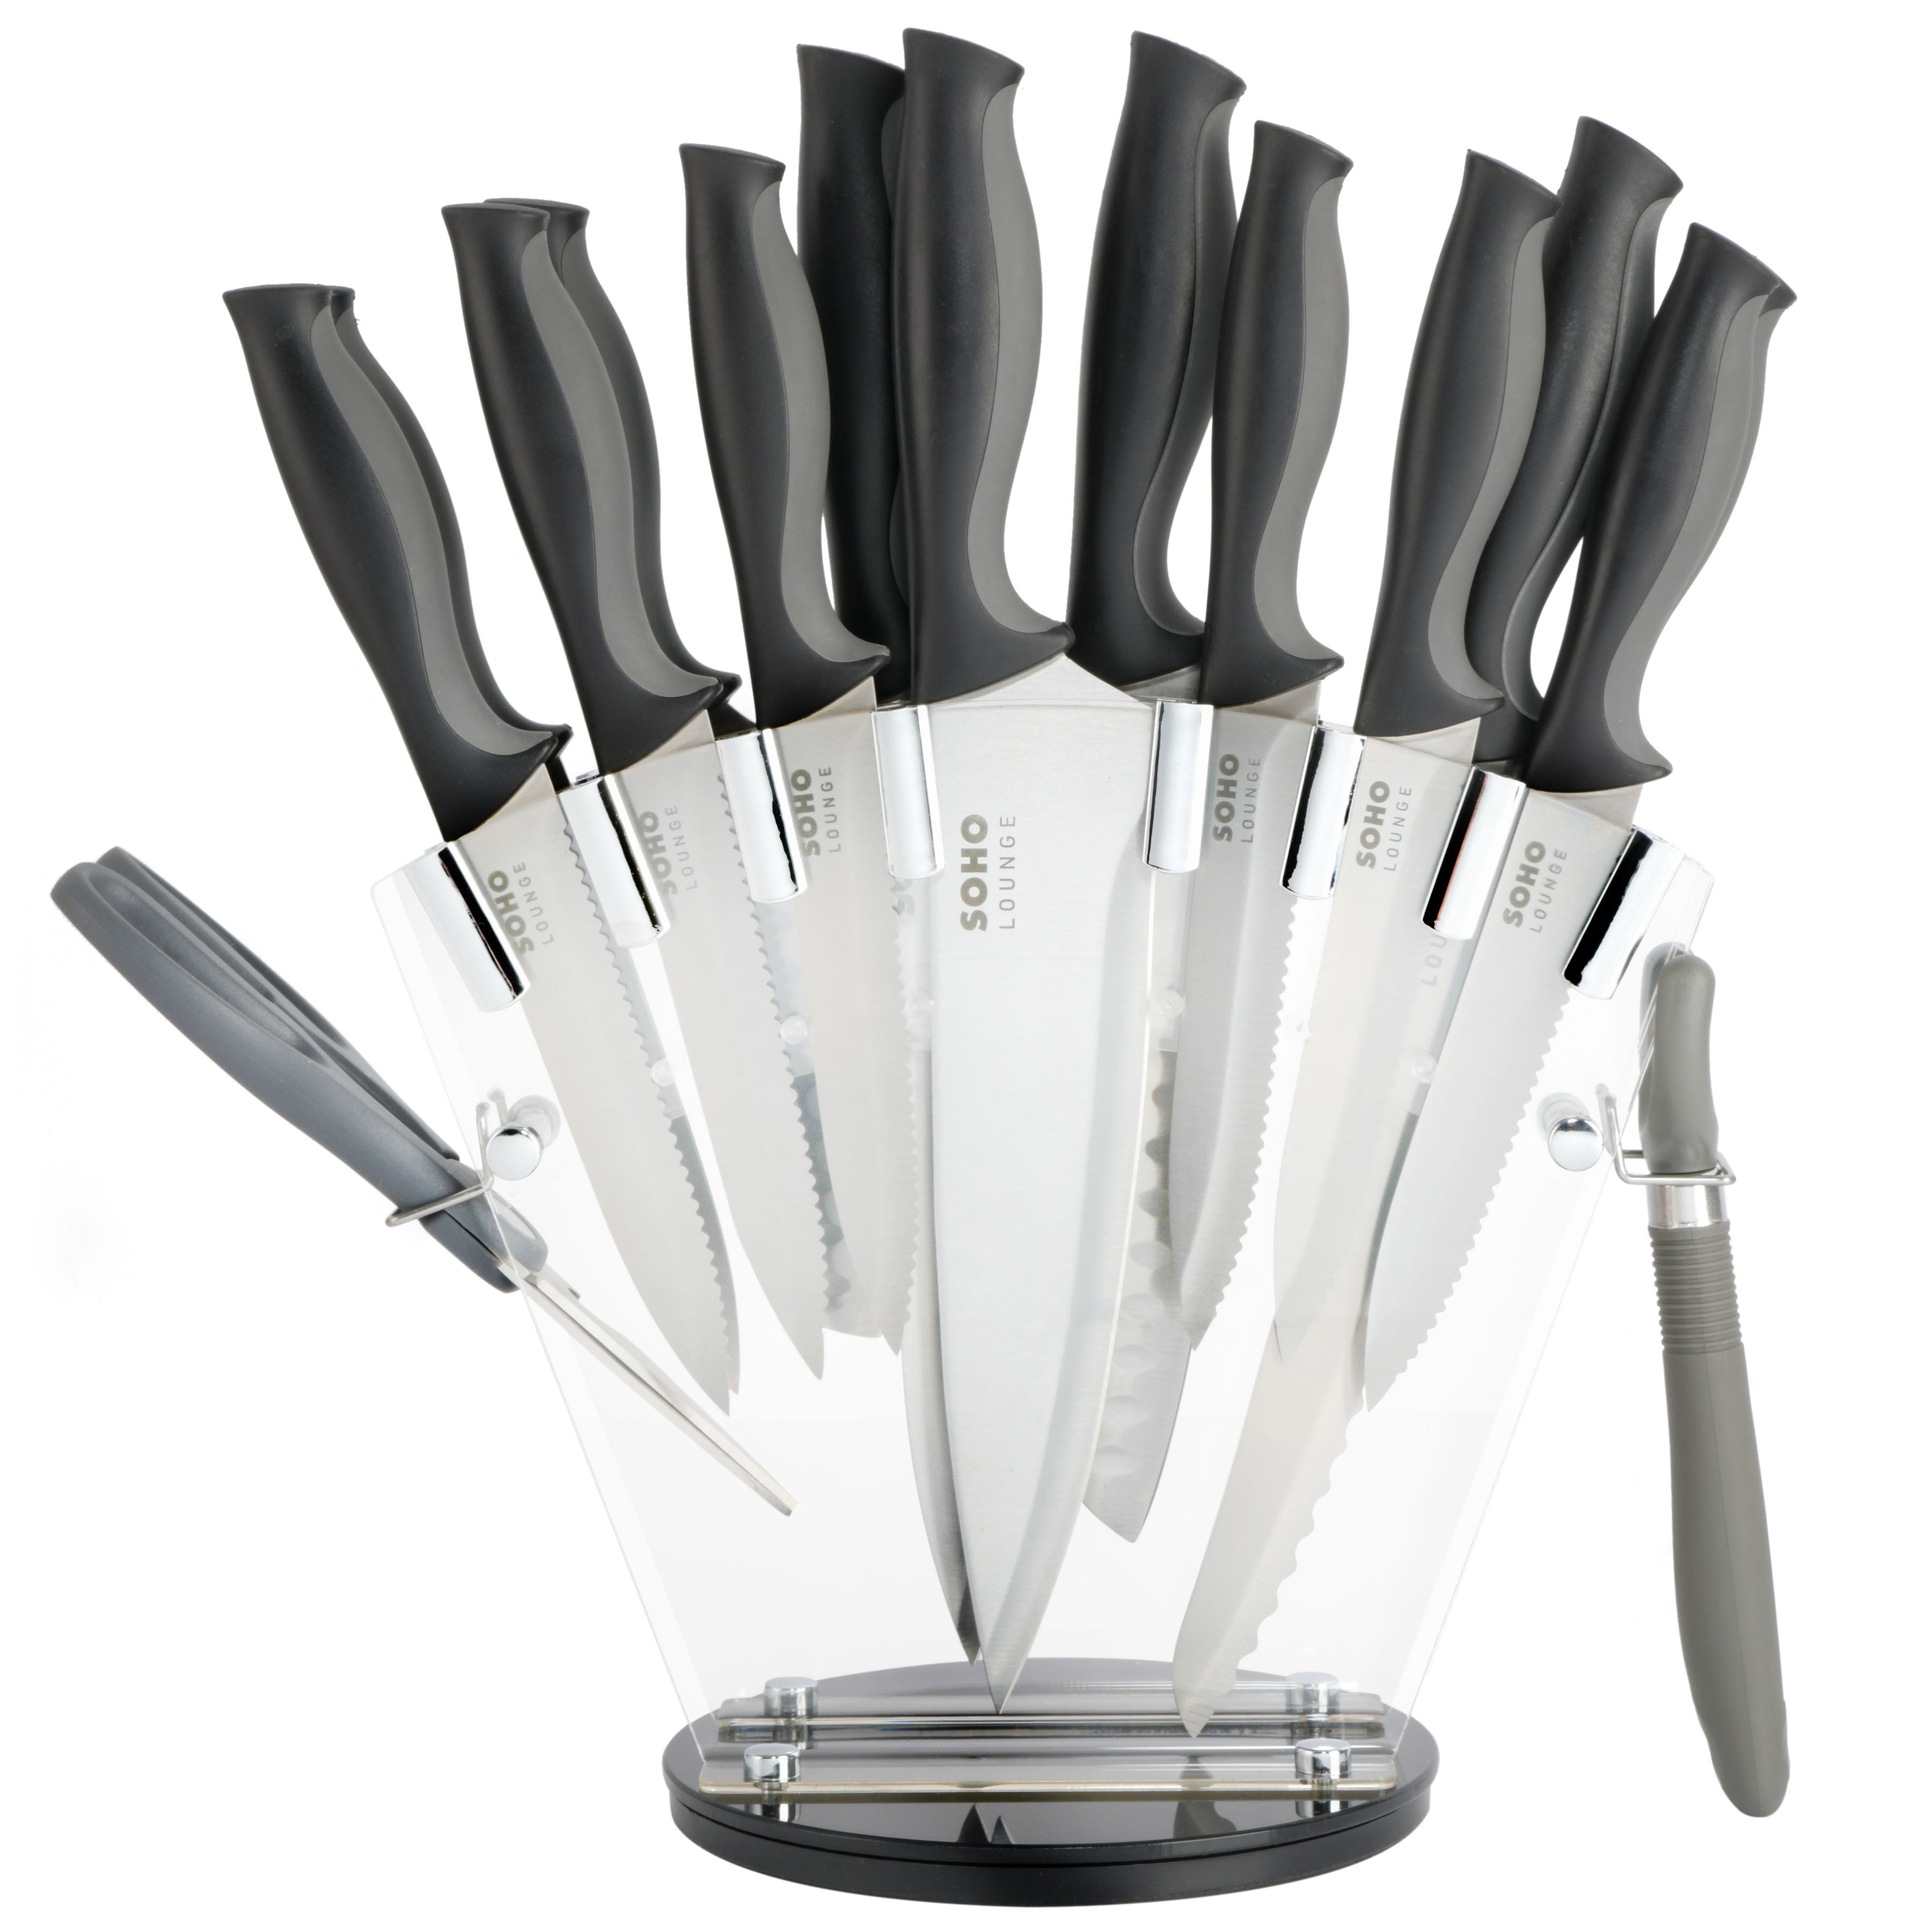 Oster Granger 14 Piece Stainless Steel Cutlery Set with Black Handles and  Wooden Block - Ergonomic Handles, Full Tang in the Cutlery department at